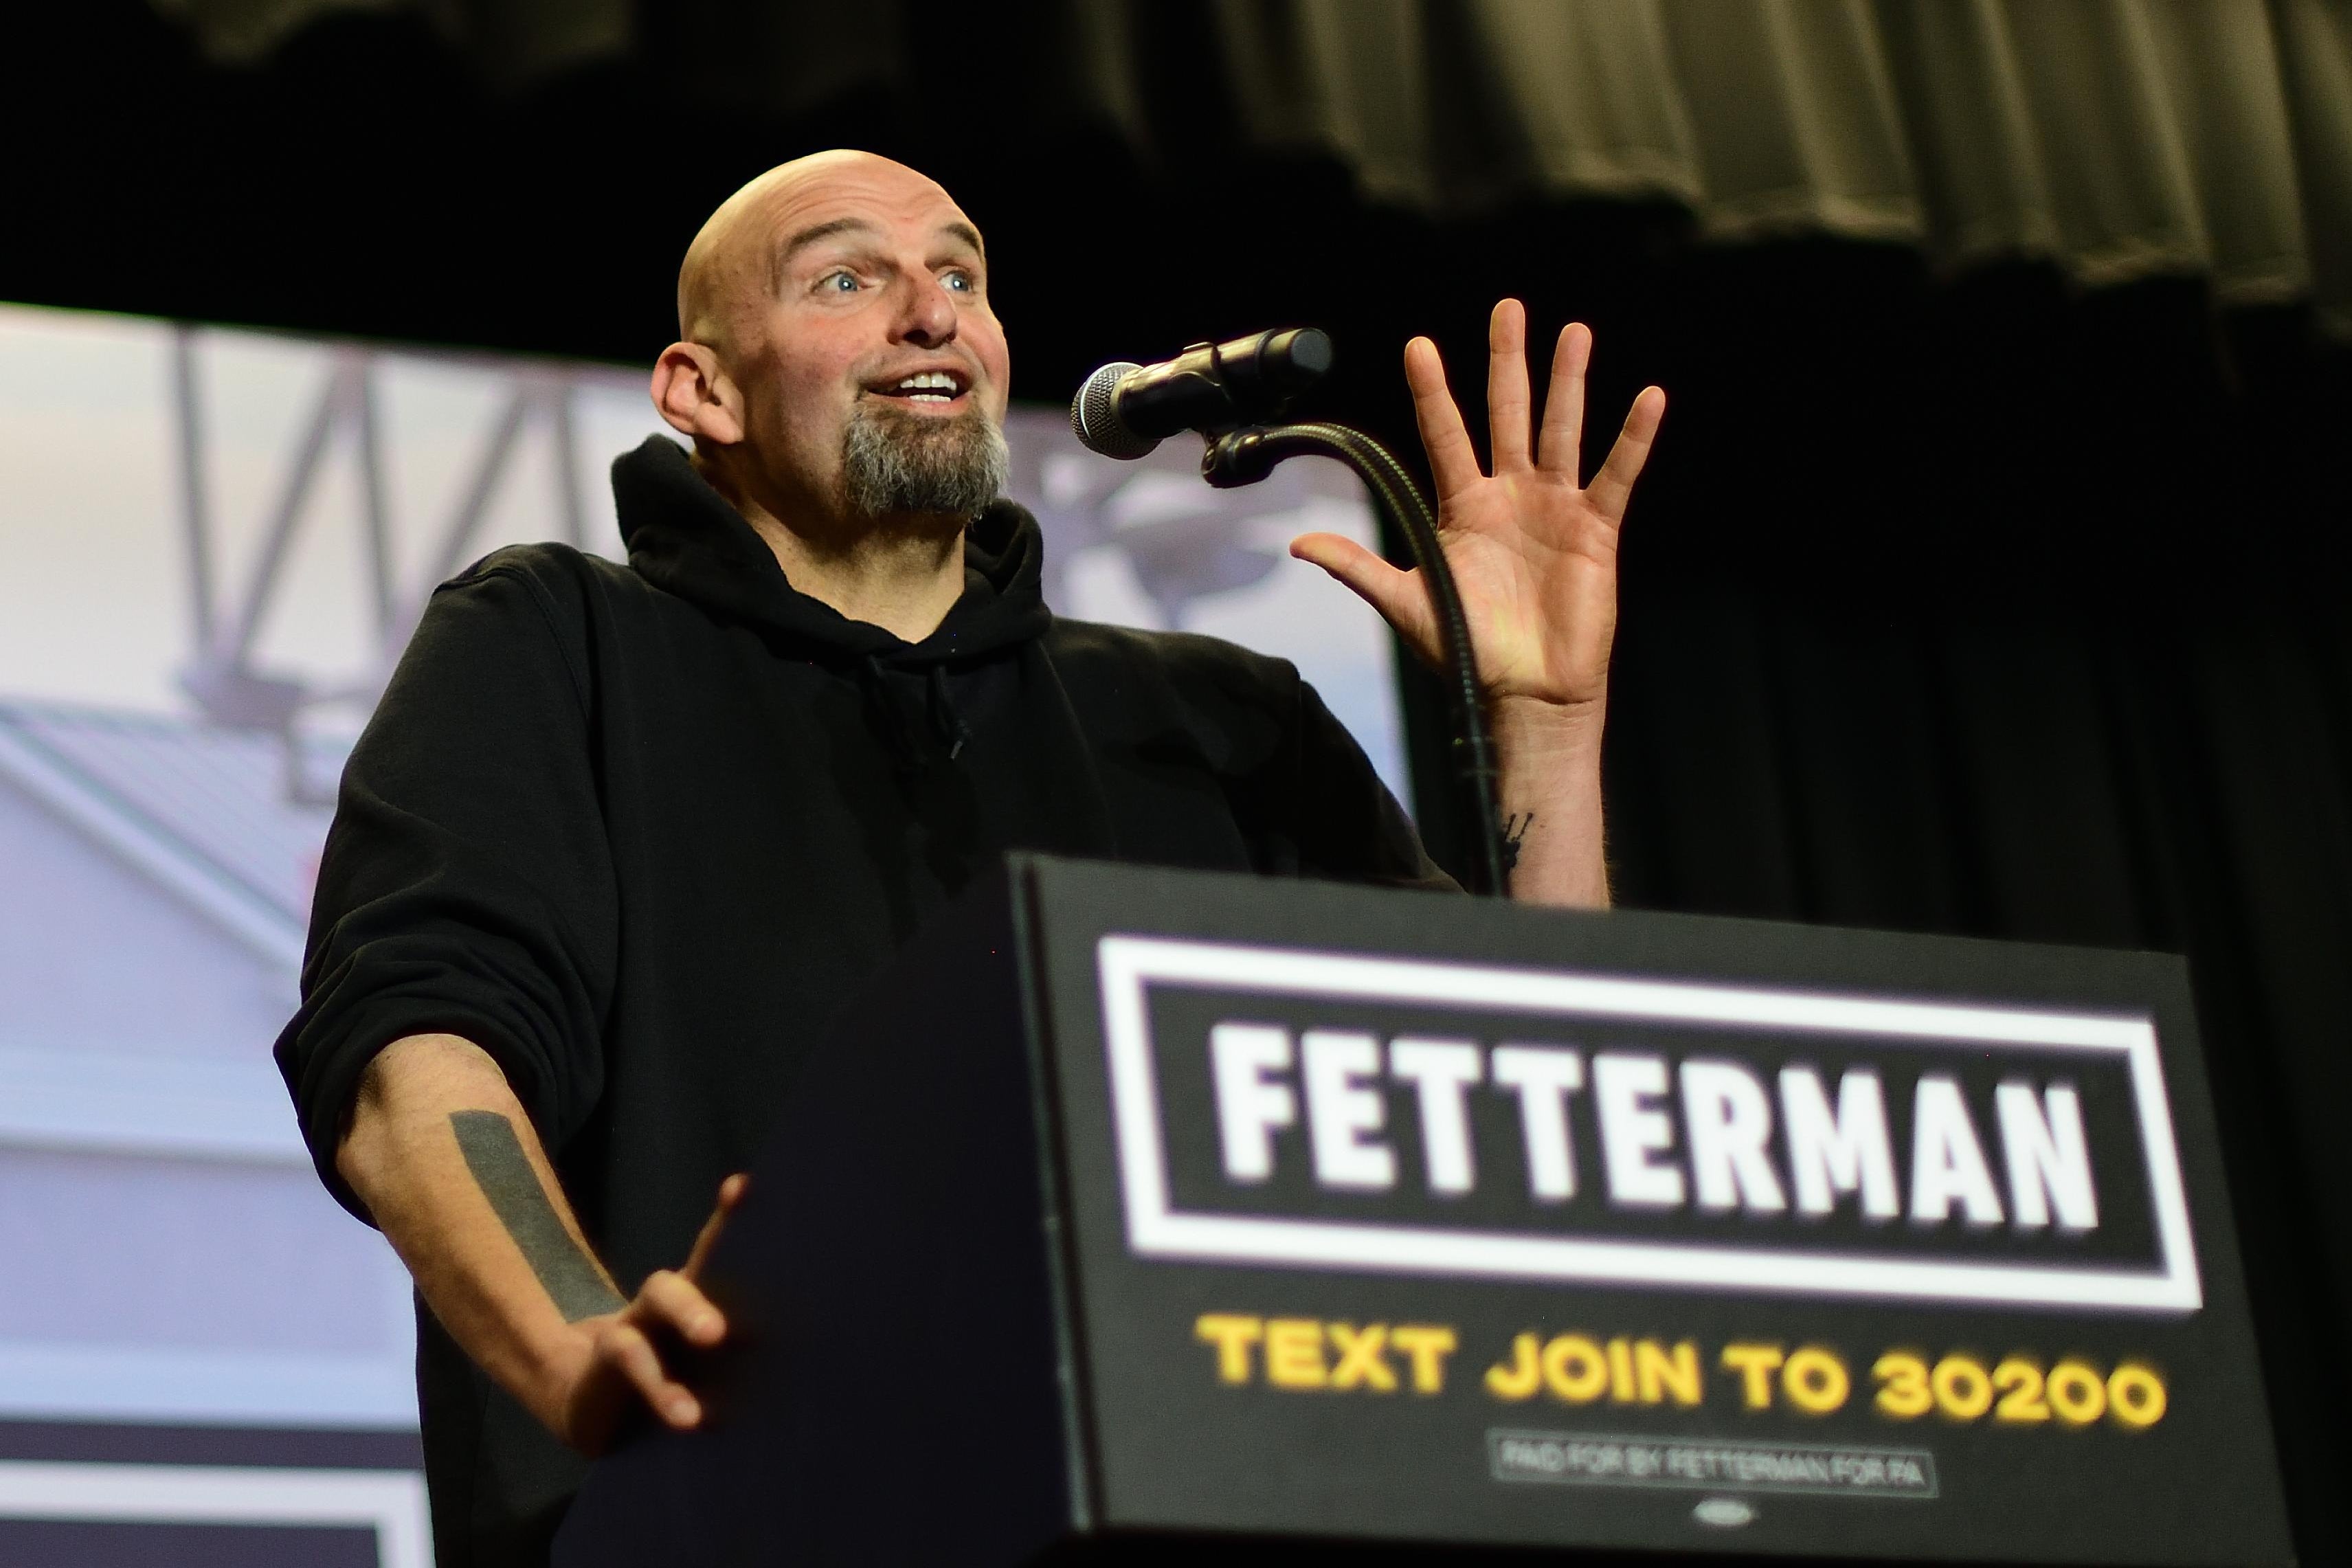 Democratic candidate for U.S. Senate John Fetterman stands at a podium while speaking at a rally.